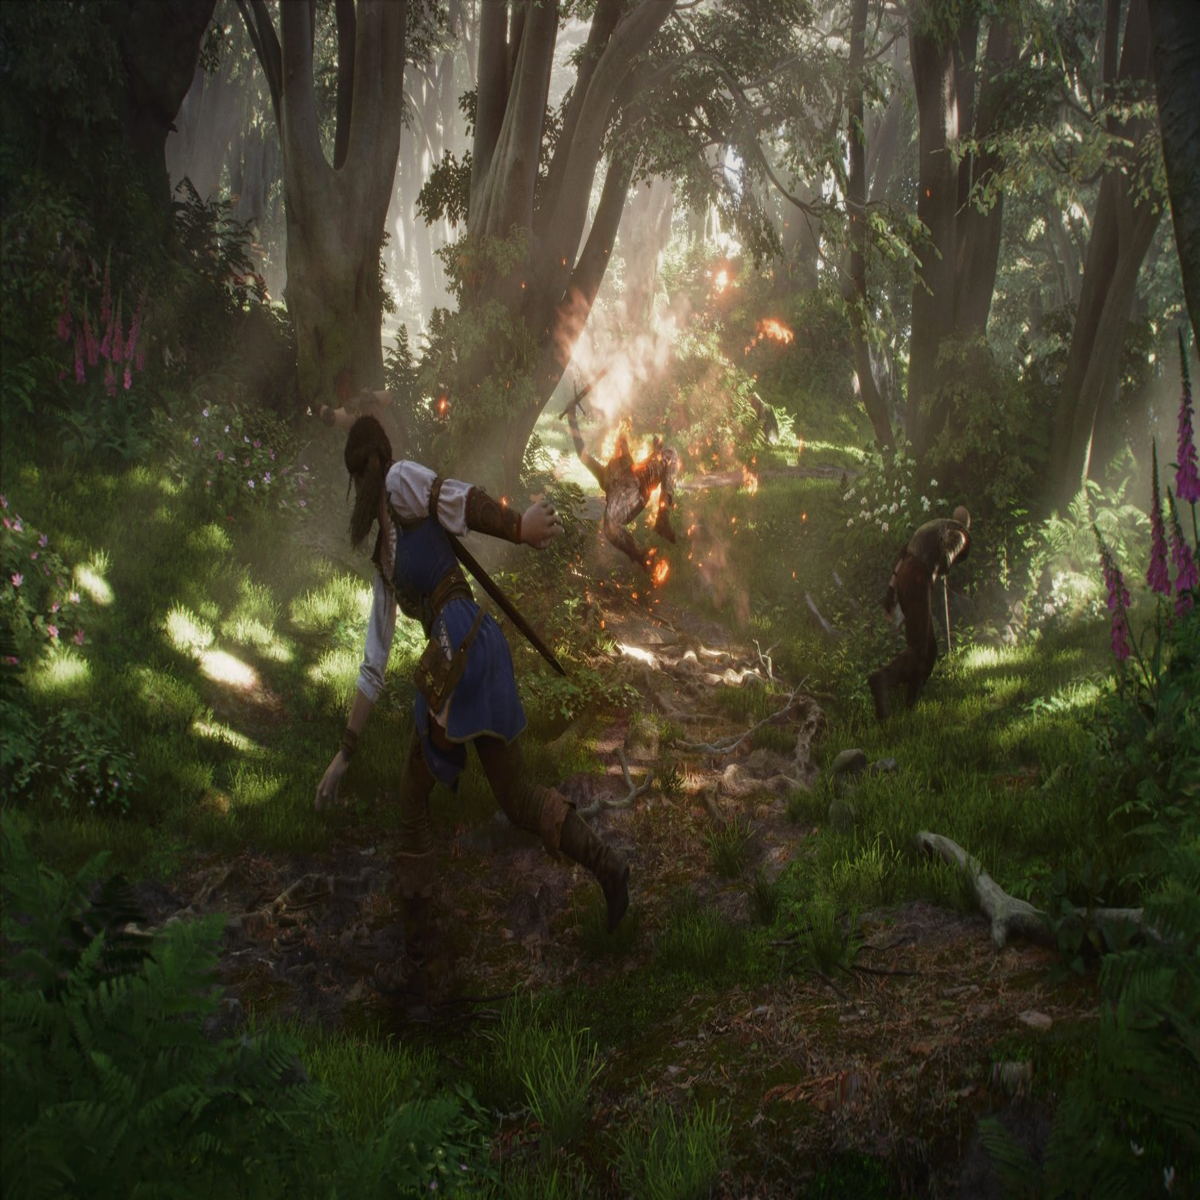 Fable dev responds to doubters: Xbox Showcase reveal was the game